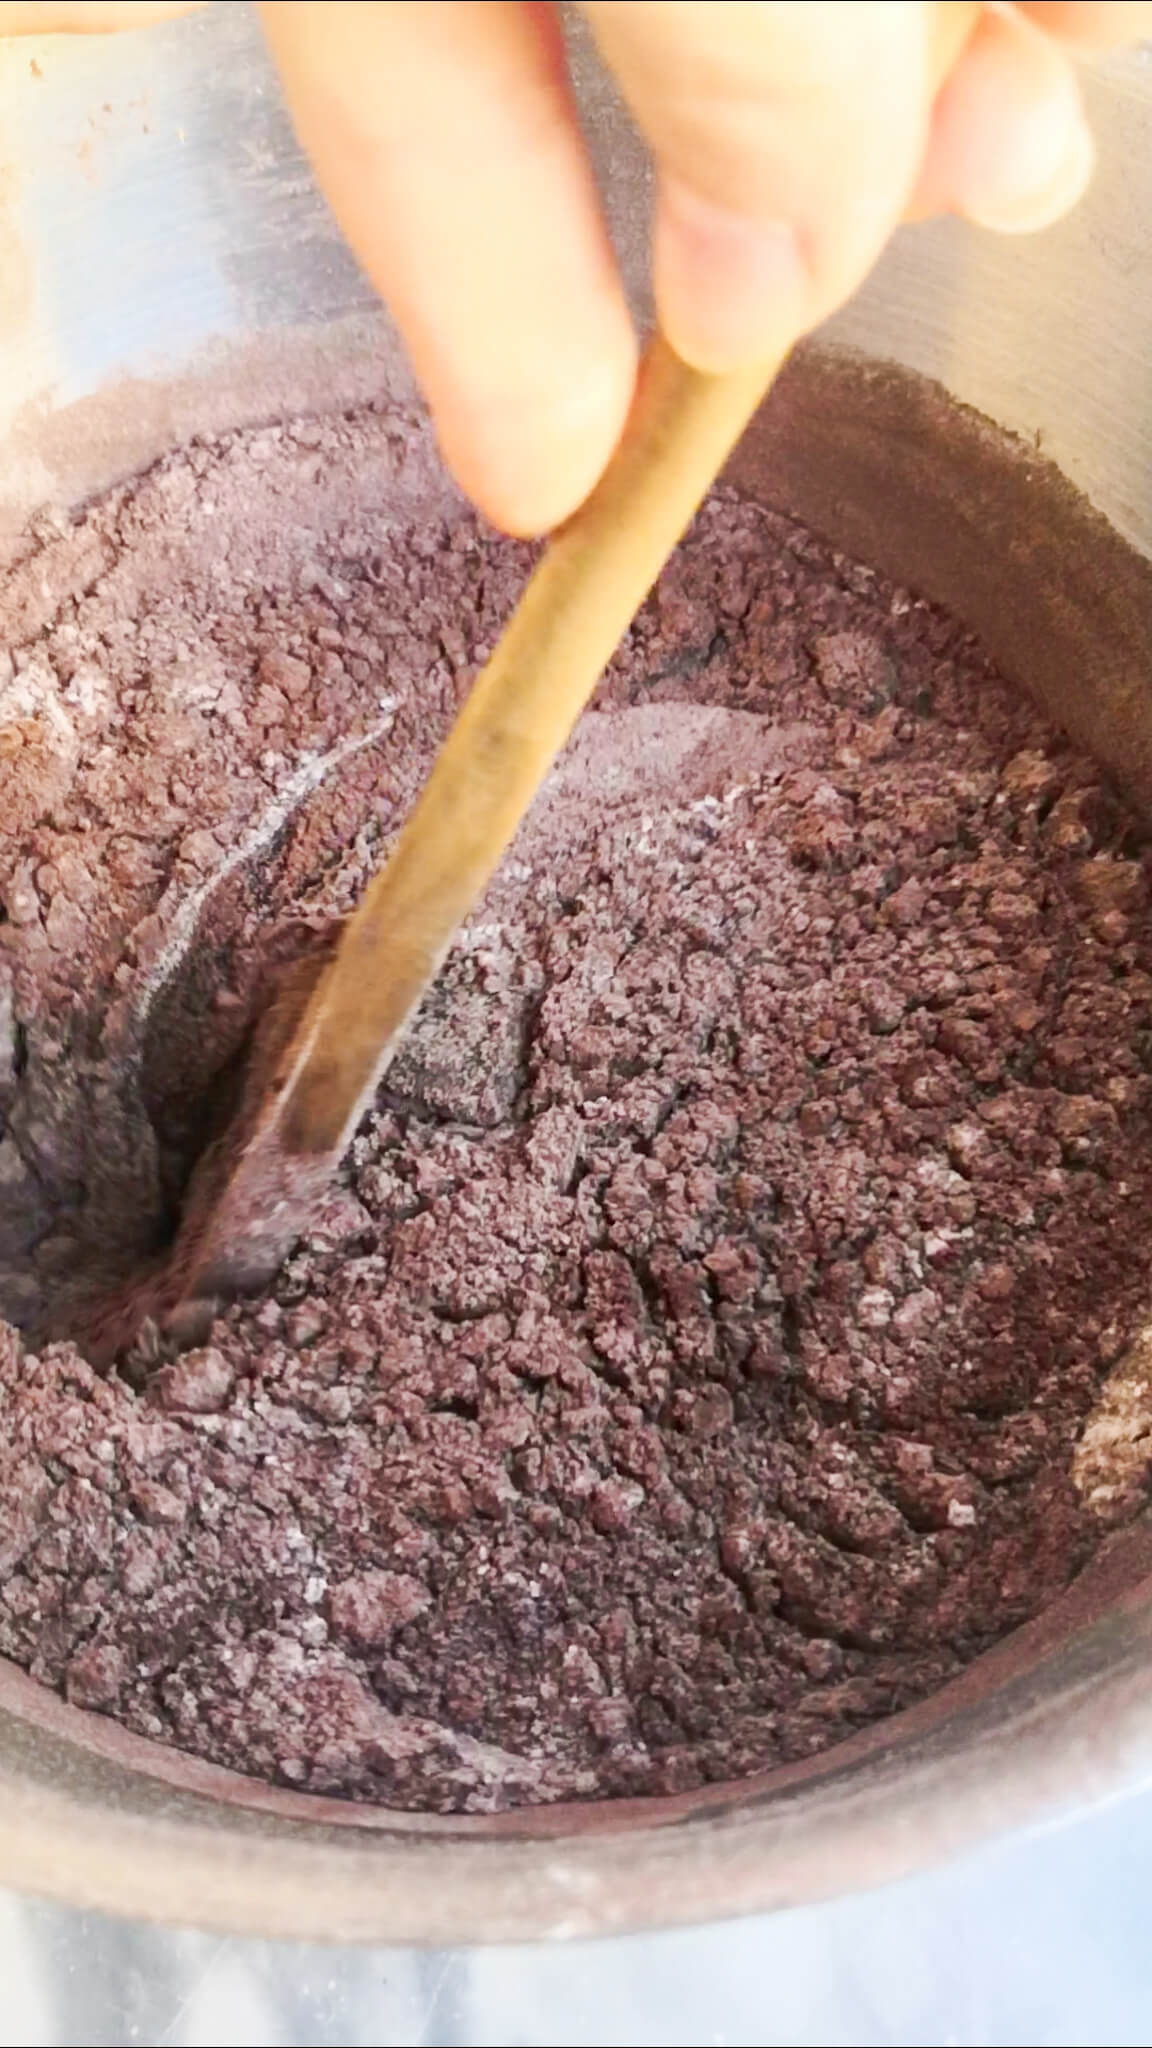 Wooden spoon mixing cocoa powder and flour into eggs, sugar and butter mix.